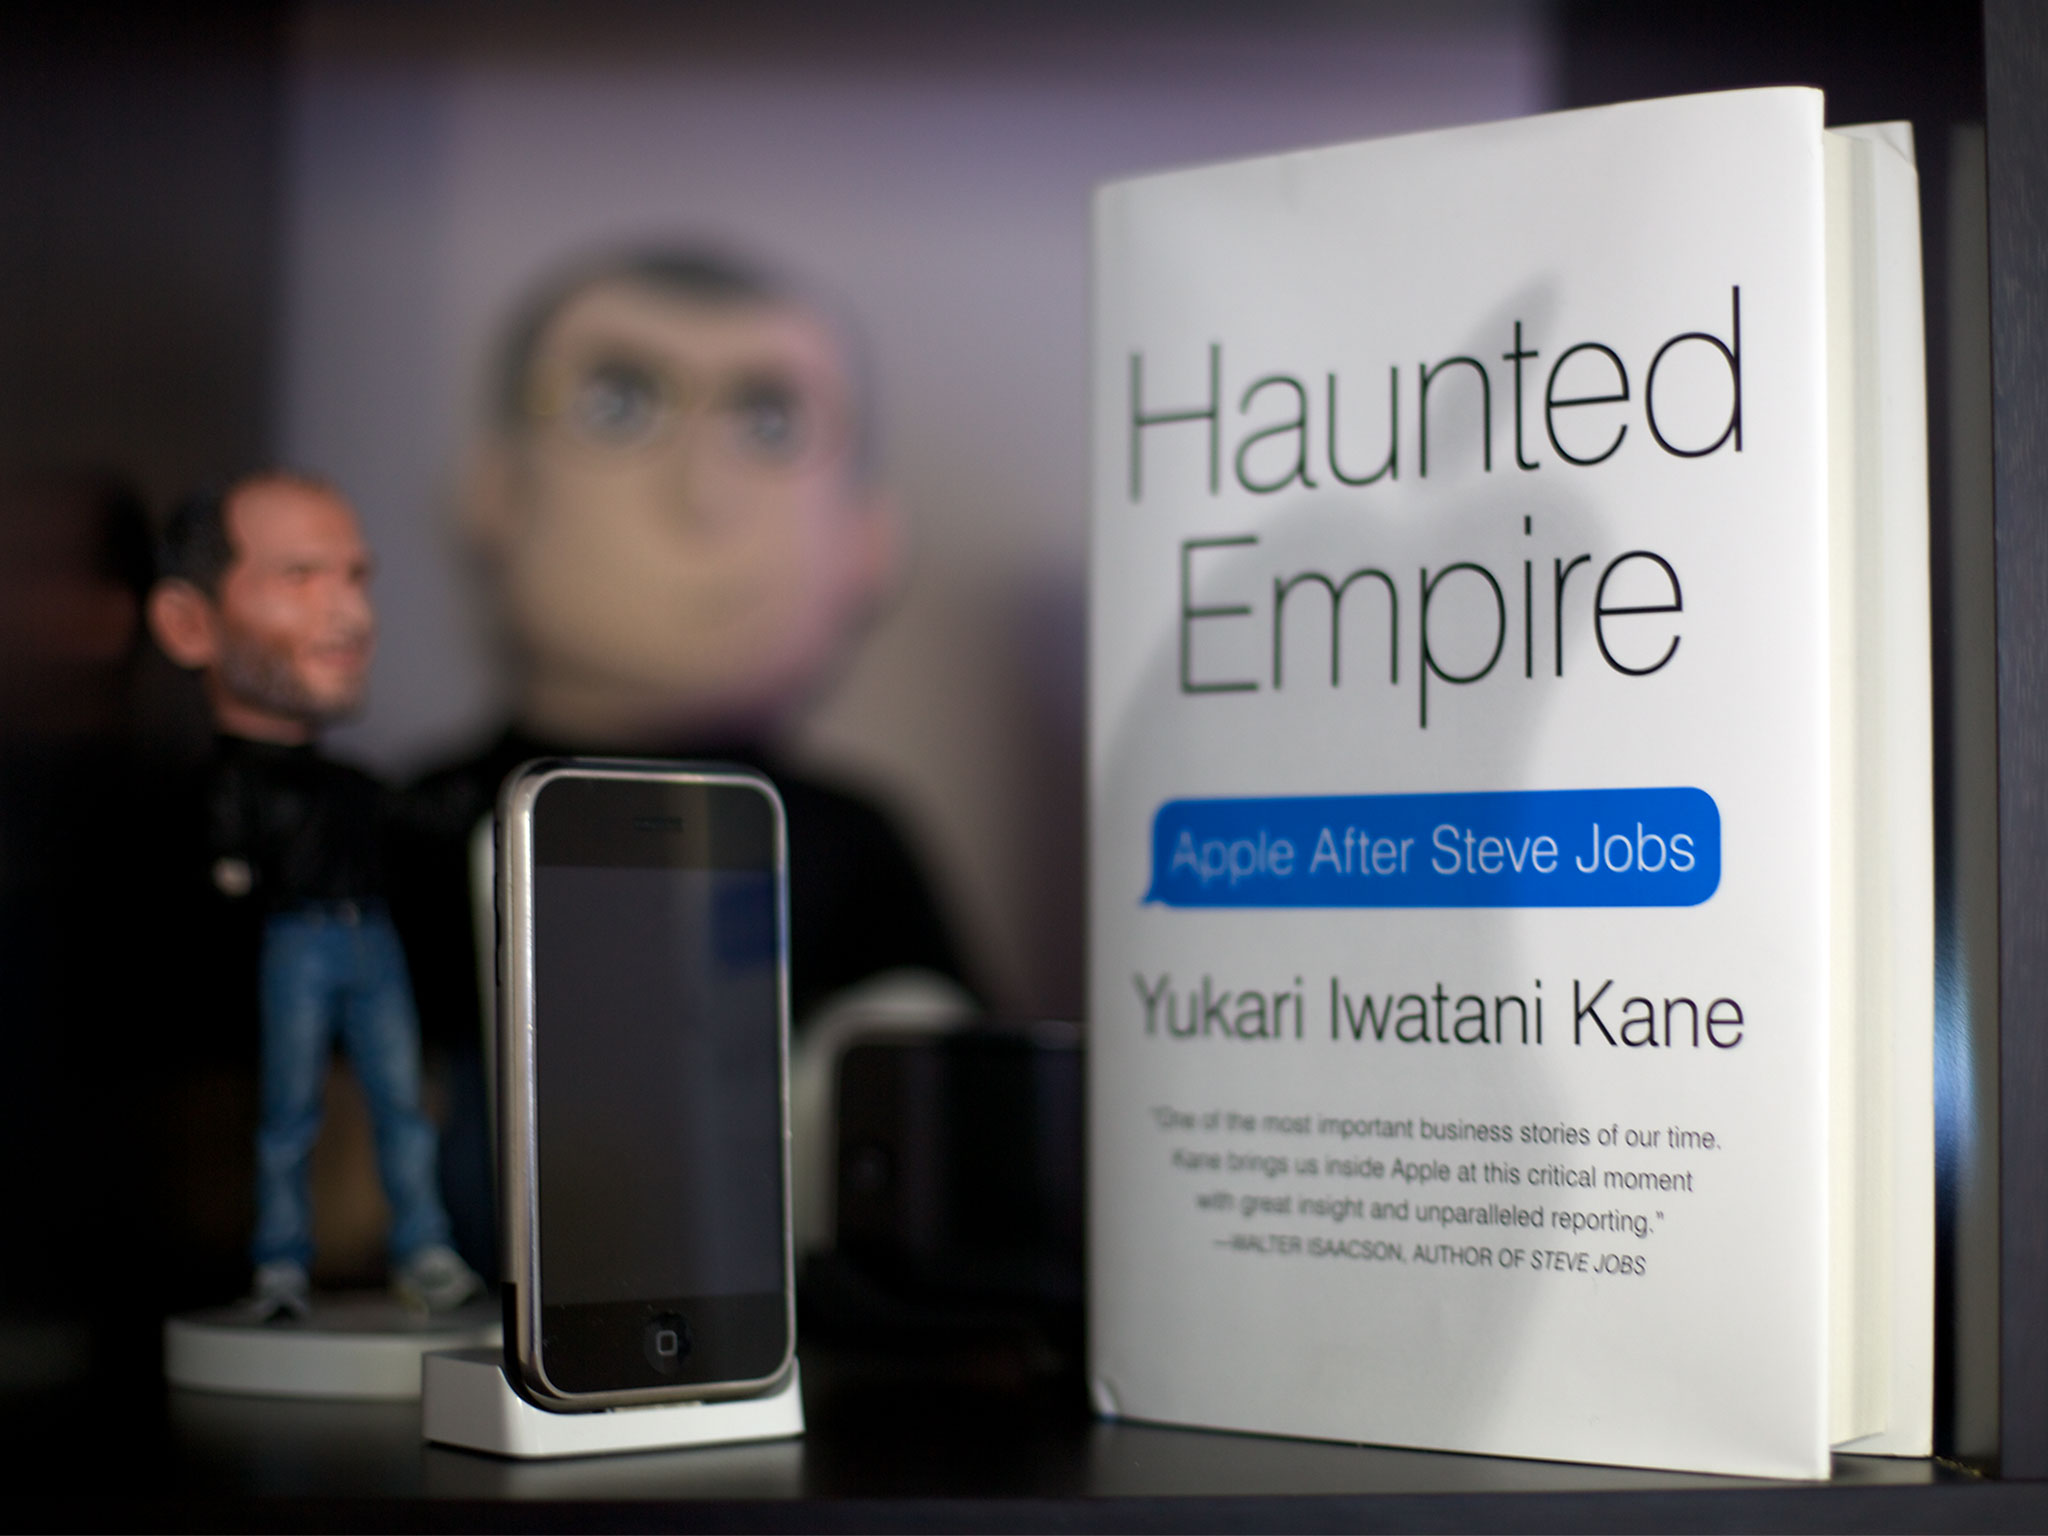 Haunted Empire review: It's the book about Apple after Steve Jobs that's the real horror story